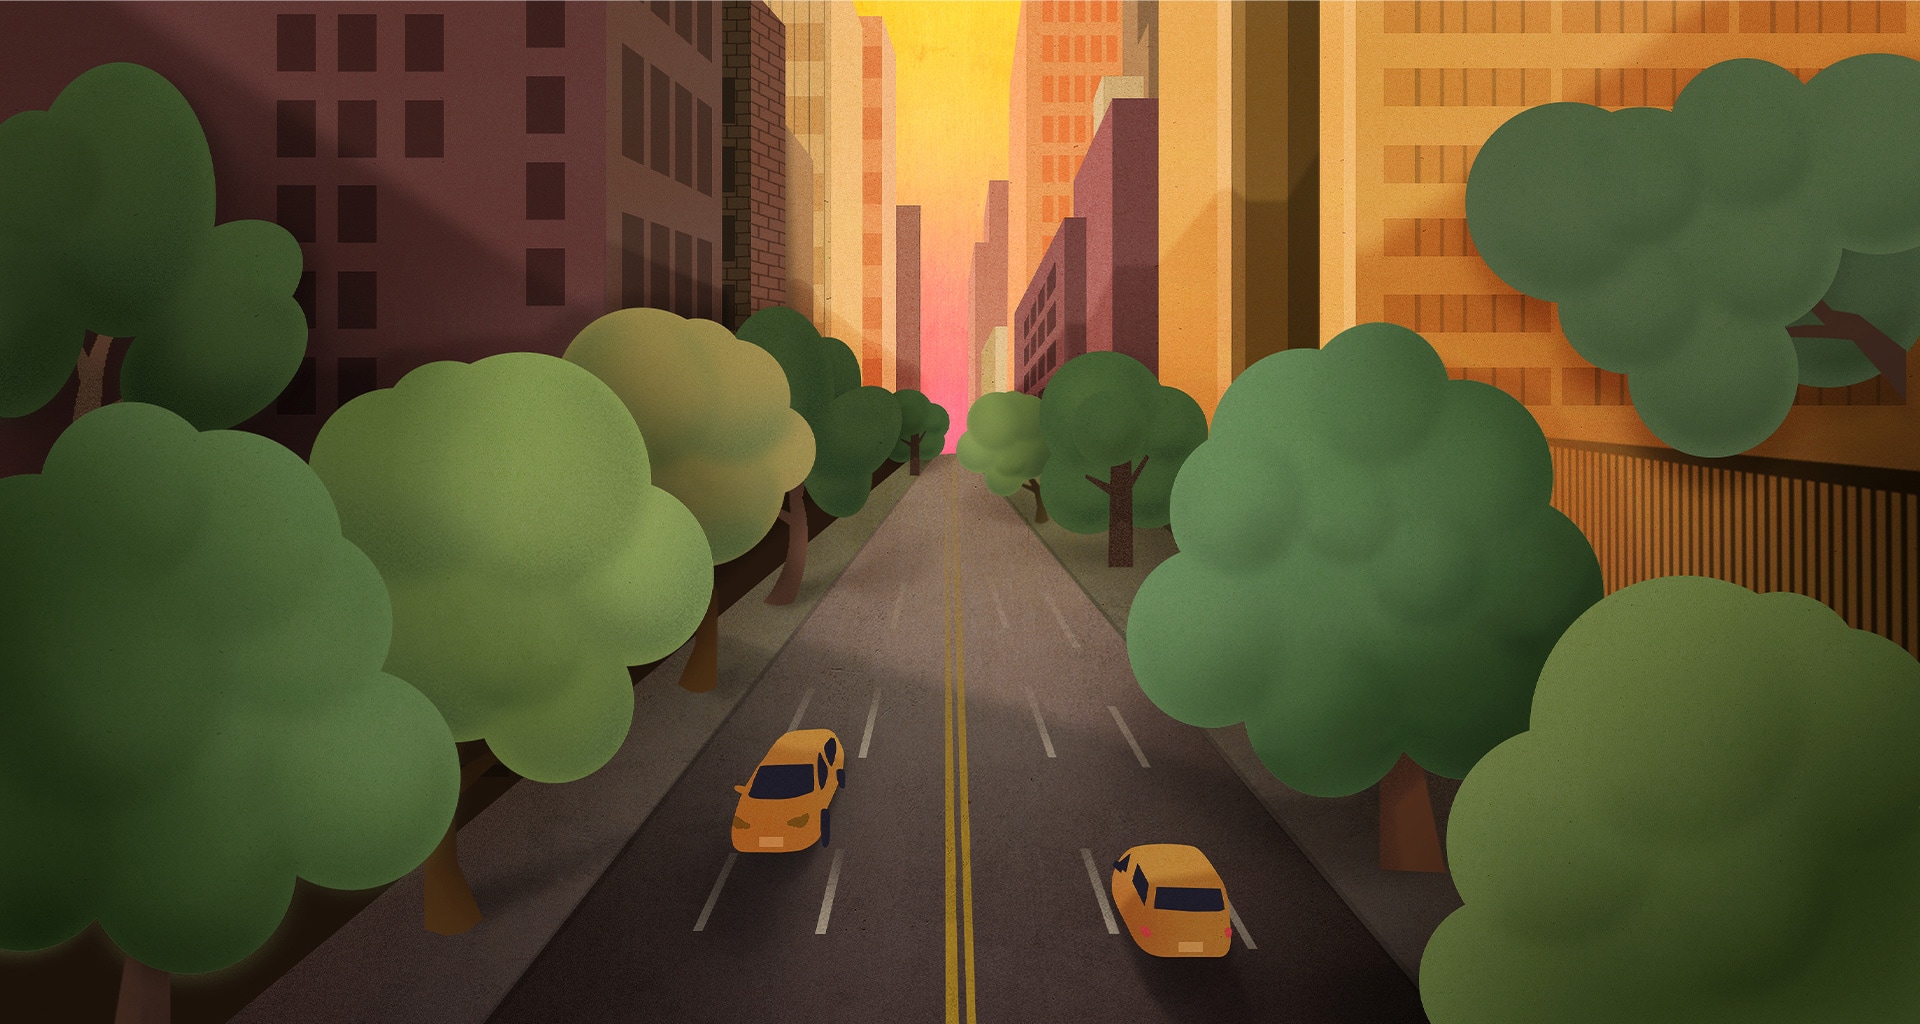 A crayon-style illustration of a tree-lined city road with cars driving through it